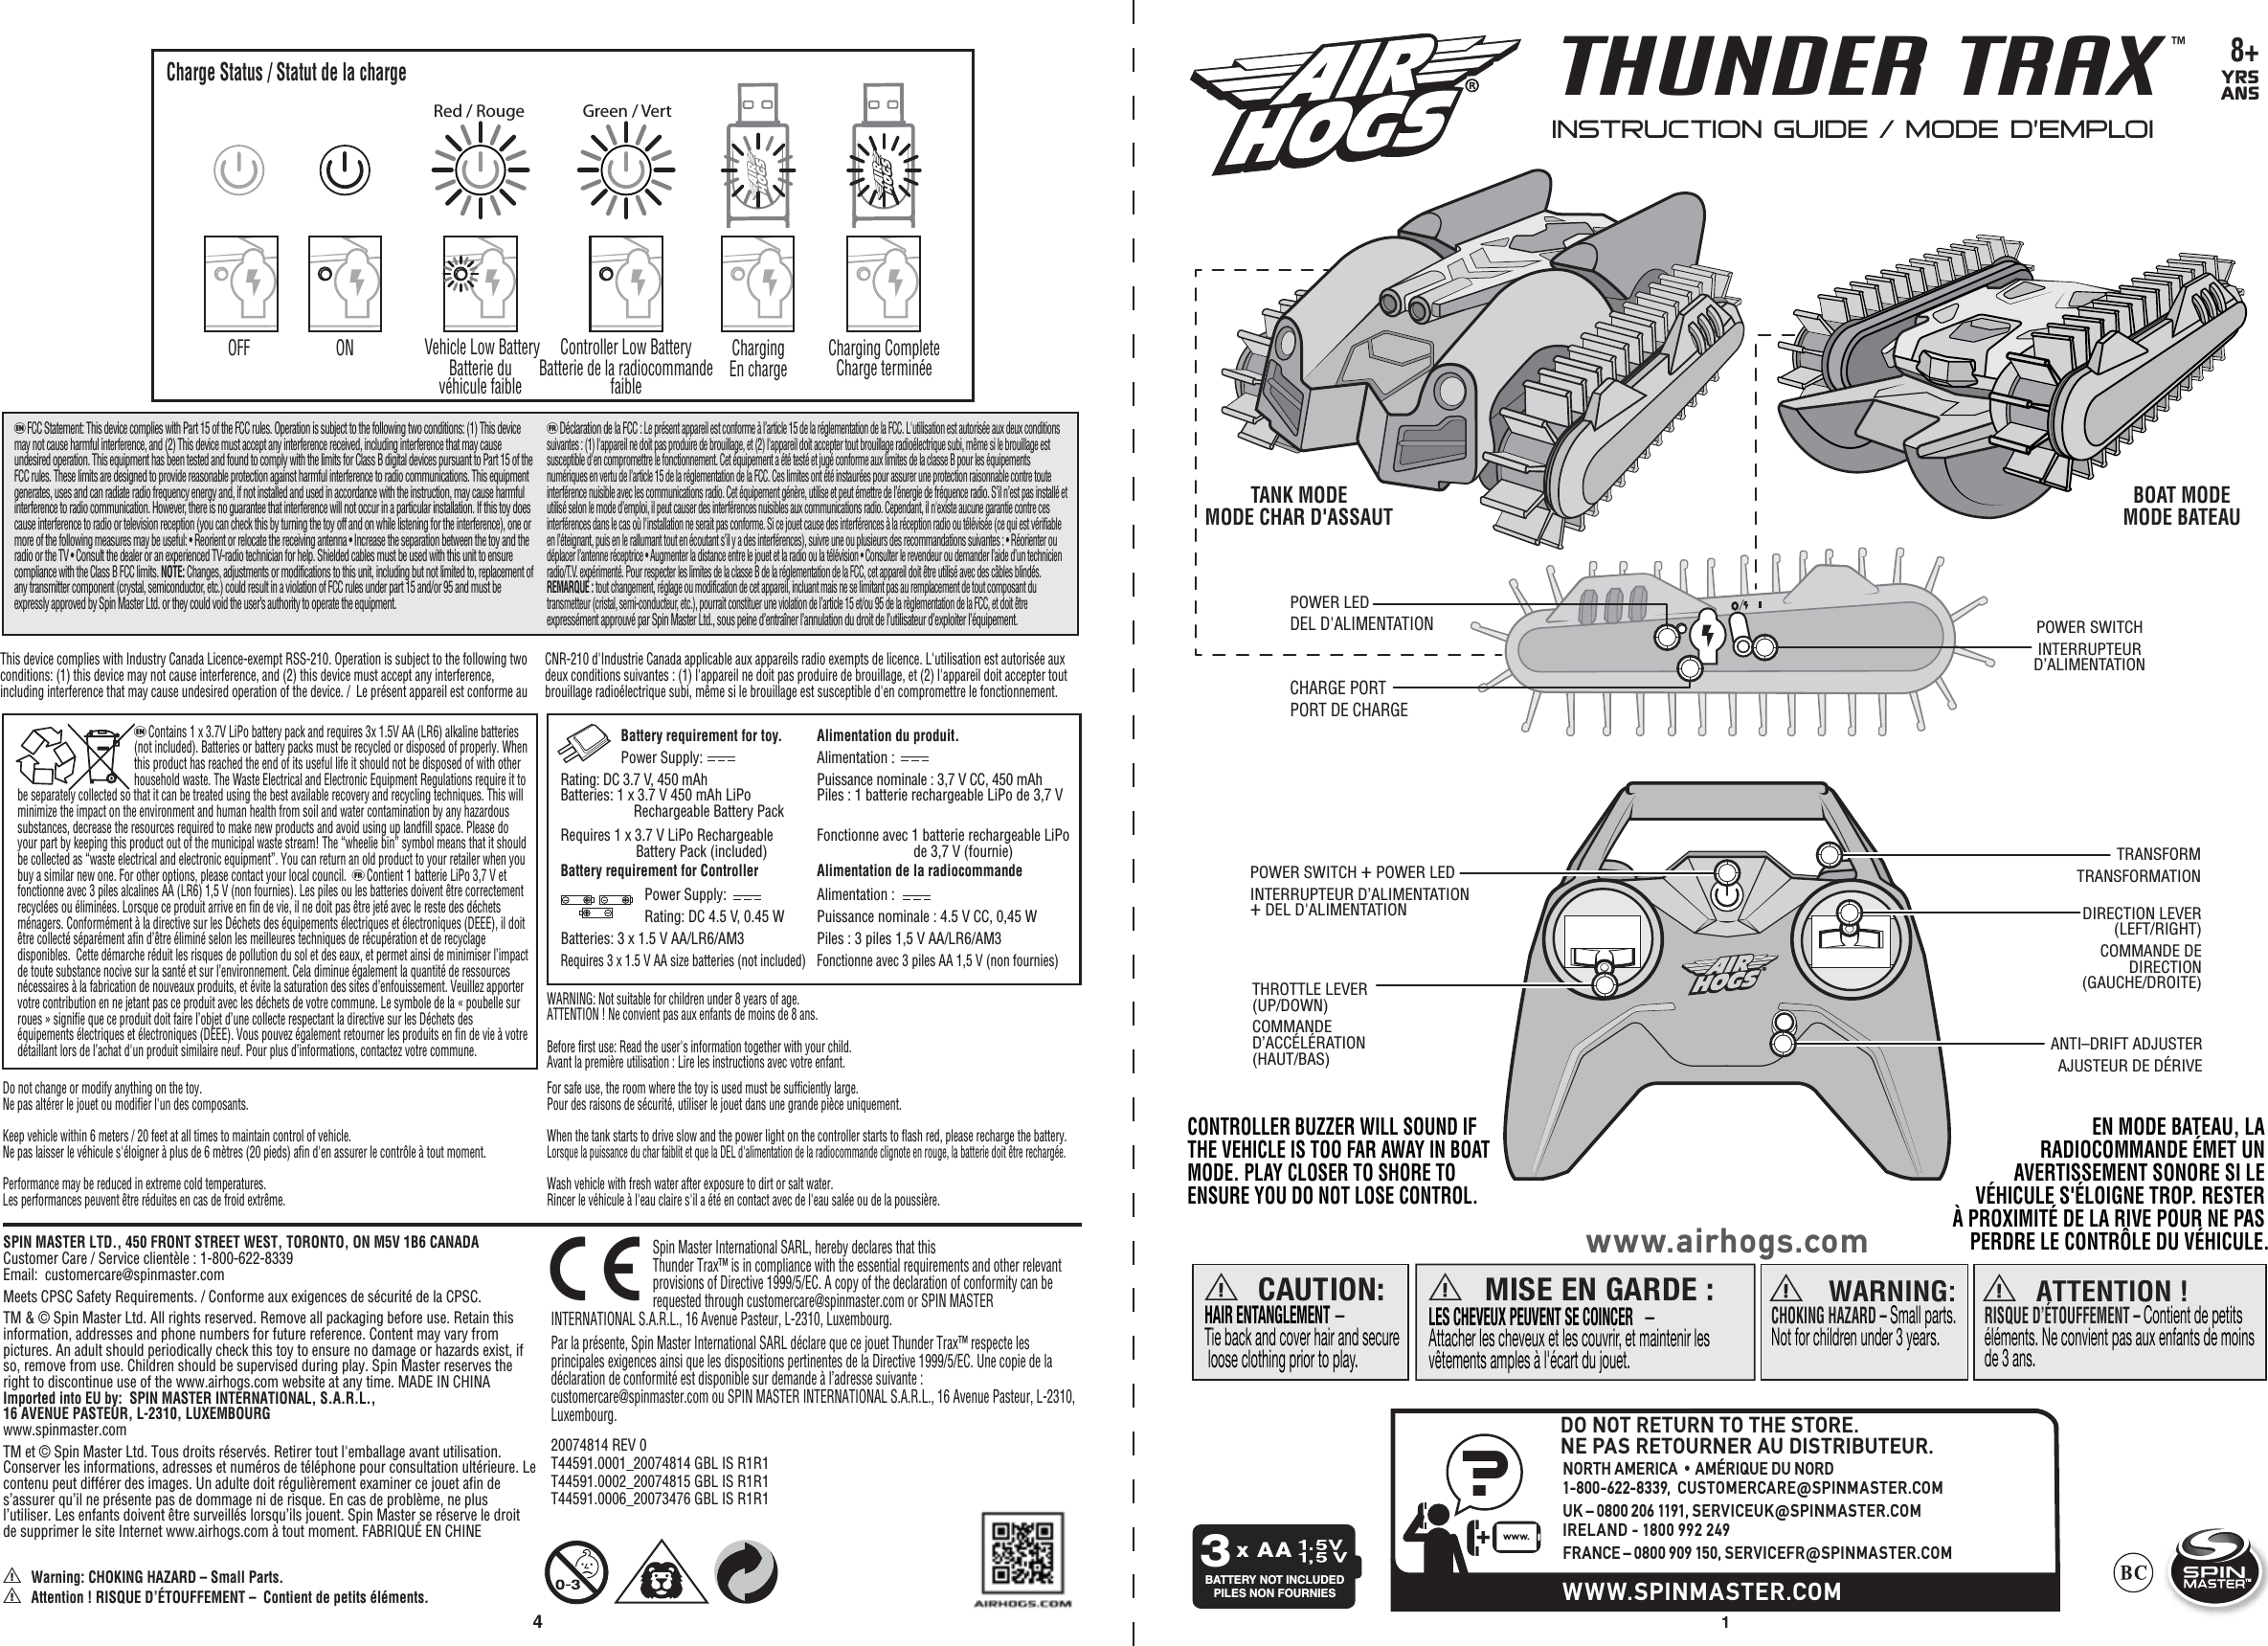 41 8+YRSANSTHUNDER TRAX™TMa WARNING: CHOKING HAZARD – Small parts.Not for children under 3 years.a ATTENTION !RISQUE D’ÉTOUFFEMENT – Contient de petits éléments. Ne convient pas aux enfants de moins de 3 ans. CAUTION:HAIR ENTANGLEMENT — Tie back and cover hair and secure loose clothing prior to play.aMISE EN GARDE :LES CHEVEUX PEUVENT SE COINCER   — Attacher les cheveux et les couvrir, et maintenir les vêtements amples à l&apos;écart du jouet.awww.airhogs.comBATTERY NOT INCLUDEDPILES NON FOURNIESx AA3INSTRUCTION GUIDE / MODE D’EMPLOI SPIN MASTER LTD., 450 FRONT STREET WEST, TORONTO, ON M5V 1B6 CANADA   Customer Care / Service clientèle : 1-800-622-8339      Email:  customercare@spinmaster.comMeets CPSC Safety Requirements. / Conforme aux exigences de sécurité de la CPSC.TM &amp; © Spin Master Ltd. All rights reserved. Remove all packaging before use. Retain this information, addresses and phone numbers for future reference. Content may vary from pictures. An adult should periodically check this toy to ensure no damage or hazards exist, if so, remove from use. Children should be supervised during play. Spin Master reserves the right to discontinue use of the www.airhogs.com website at any time. MADE IN CHINAImported into EU by:  SPIN MASTER INTERNATIONAL, S.A.R.L., 16 AVENUE PASTEUR, L-2310, LUXEMBOURGwww.spinmaster.comTM et © Spin Master Ltd. Tous droits réservés. Retirer tout l&apos;emballage avant utilisation. Conserver les informations, adresses et numéros de téléphone pour consultation ultérieure. Le contenu peut différer des images. Un adulte doit régulièrement examiner ce jouet afin de s’assurer qu’il ne présente pas de dommage ni de risque. En cas de problème, ne plus l’utiliser. Les enfants doivent être surveillés lorsqu’ils jouent. Spin Master se réserve le droit de supprimer le site Internet www.airhogs.com à tout moment. FABRIQUÉ EN CHINE  Battery requirement for toy.         Power Supply:               Rating: DC 3.7 V, 450 mAh                Batteries: 1 x 3.7 V 450 mAh LiPo   Rechargeable Battery Pack  Requires 1 x 3.7 V LiPo Rechargeable   Battery Pack (included)  Battery requirement for Controller  Power Supply:  Rating: DC 4.5 V, 0.45 W Batteries: 3 x 1.5 V AA/LR6/AM3 Requires 3 x 1.5 V AA size batteries (not included)   Alimentation du produit.Alimentation :  Puissance nominale : 3,7 V CC, 450 mAhPiles : 1 batterie rechargeable LiPo de 3,7 VFonctionne avec 1 batterie rechargeable LiPo          de 3,7 V (fournie)Alimentation de la radiocommandeAlimentation :  Puissance nominale : 4.5 V CC, 0,45 WPiles : 3 piles 1,5 V AA/LR6/AM3Fonctionne avec 3 piles AA 1,5 V (non fournies) eFCC Statement: This device complies with Part 15 of the FCC rules. Operation is subject to the following two conditions: (1) This device may not cause harmful interference, and (2) This device must accept any interference received, including interference that may cause undesired operation. This equipment has been tested and found to comply with the limits for Class B digital devices pursuant to Part 15 of the FCC rules. These limits are designed to provide reasonable protection against harmful interference to radio communications. This equipment generates, uses and can radiate radio frequency energy and, if not installed and used in accordance with the instruction, may cause harmful interference to radio communication. However, there is no guarantee that interference will not occur in a particular installation. If this toy does cause interference to radio or television reception (you can check this by turning the toy off and on while listening for the interference), one or more of the following measures may be useful: • Reorient or relocate the receiving antenna • Increase the separation between the toy and the radio or the TV • Consult the dealer or an experienced TV-radio technician for help. Shielded cables must be used with this unit to ensure compliance with the Class B FCC limits. NOTE: Changes, adjustments or modifications to this unit, including but not limited to, replacement of any transmitter component (crystal, semiconductor, etc.) could result in a violation of FCC rules under part 15 and/or 95 and must be expressly approved by Spin Master Ltd. or they could void the user’s authority to operate the equipment.  fDéclaration de la FCC : Le présent appareil est conforme à l’article 15 de la réglementation de la FCC. L&apos;utilisation est autorisée aux deux conditions suivantes : (1) l&apos;appareil ne doit pas produire de brouillage, et (2) l&apos;appareil doit accepter tout brouillage radioélectrique subi, même si le brouillage est susceptible d&apos;en compromettre le fonctionnement. Cet équipement a été testé et jugé conforme aux limites de la classe B pour les équipements numériques en vertu de l’article 15 de la réglementation de la FCC. Ces limites ont été instaurées pour assurer une protection raisonnable contre toute interférence nuisible avec les communications radio. Cet équipement génère, utilise et peut émettre de l’énergie de fréquence radio. S’il n’est pas installé et utilisé selon le mode d’emploi, il peut causer des interférences nuisibles aux communications radio. Cependant, il n&apos;existe aucune garantie contre ces interférences dans le cas où l&apos;installation ne serait pas conforme. Si ce jouet cause des interférences à la réception radio ou télévisée (ce qui est vérifiable en l’éteignant, puis en le rallumant tout en écoutant s’il y a des interférences), suivre une ou plusieurs des recommandations suivantes : • Réorienter ou déplacer l’antenne réceptrice • Augmenter la distance entre le jouet et la radio ou la télévision • Consulter le revendeur ou demander l’aide d’un technicien radio/T.V. expérimenté. Pour respecter les limites de la classe B de la réglementation de la FCC, cet appareil doit être utilisé avec des câbles blindés. REMARQUE : tout changement, réglage ou modification de cet appareil, incluant mais ne se limitant pas au remplacement de tout composant du transmetteur (cristal, semi-conducteur, etc.), pourrait constituer une violation de l’article 15 et/ou 95 de la règlementation de la FCC, et doit être expressément approuvé par Spin Master Ltd., sous peine d’entraîner l’annulation du droit de l’utilisateur d’exploiter l’équipement.This device complies with Industry Canada Licence-exempt RSS-210. Operation is subject to the following two conditions: (1) this device may not cause interference, and (2) this device must accept any interference, including interference that may cause undesired operation of the device. /  Le présent appareil est conforme au CNR-210 d&apos;Industrie Canada applicable aux appareils radio exempts de licence. L&apos;utilisation est autorisée aux deux conditions suivantes : (1) l&apos;appareil ne doit pas produire de brouillage, et (2) l&apos;appareil doit accepter tout brouillage radioélectrique subi, même si le brouillage est susceptible d&apos;en compromettre le fonctionnement.20074814 REV 0T44591.0001_20074814 GBL IS R1R1T44591.0002_20074815 GBL IS R1R1T44591.0006_20073476 GBL IS R1R1CHARGE PORT PORT DE CHARGETANK MODEMODE CHAR D&apos;ASSAUT BOAT MODEMODE BATEAUDIRECTION LEVER(LEFT/RIGHT)  COMMANDE DE DIRECTION (GAUCHE/DROITE) ANTI–DRIFT ADJUSTER  AJUSTEUR DE DÉRIVETHROTTLE LEVER(UP/DOWN)  COMMANDE D’ACCÉLÉRATION (HAUT/BAS)POWER SWITCH + POWER LED INTERRUPTEUR D’ALIMENTATION+ DEL D&apos;ALIMENTATIONPOWER SWITCH  INTERRUPTEUR D’ALIMENTATIONPOWER LEDDEL D&apos;ALIMENTATIONTRANSFORMTRANSFORMATIONeContains 1 x 3.7V LiPo battery pack and requires 3x 1.5V AA (LR6) alkaline batteries (not included). Batteries or battery packs must be recycled or disposed of properly. When this product has reached the end of its useful life it should not be disposed of with other household waste. The Waste Electrical and Electronic Equipment Regulations require it to be separately collected so that it can be treated using the best available recovery and recycling techniques. This will minimize the impact on the environment and human health from soil and water contamination by any hazardous substances, decrease the resources required to make new products and avoid using up landfill space. Please do your part by keeping this product out of the municipal waste stream! The “wheelie bin” symbol means that it should be collected as “waste electrical and electronic equipment”. You can return an old product to your retailer when you buy a similar new one. For other options, please contact your local council.  fContient 1 batterie LiPo 3,7 V et fonctionne avec 3 piles alcalines AA (LR6) 1,5 V (non fournies). Les piles ou les batteries doivent être correctement recyclées ou éliminées. Lorsque ce produit arrive en fin de vie, il ne doit pas être jeté avec le reste des déchets ménagers. Conformément à la directive sur les Déchets des équipements électriques et électroniques (DEEE), il doit être collecté séparément afin d’être éliminé selon les meilleures techniques de récupération et de recyclage disponibles.  Cette démarche réduit les risques de pollution du sol et des eaux, et permet ainsi de minimiser l’impact de toute substance nocive sur la santé et sur l’environnement. Cela diminue également la quantité de ressources nécessaires à la fabrication de nouveaux produits, et évite la saturation des sites d’enfouissement. Veuillez apporter votre contribution en ne jetant pas ce produit avec les déchets de votre commune. Le symbole de la « poubelle sur roues » signifie que ce produit doit faire l’objet d’une collecte respectant la directive sur les Déchets des équipements électriques et électroniques (DEEE). Vous pouvez également retourner les produits en fin de vie à votre détaillant lors de l’achat d&apos;un produit similaire neuf. Pour plus d’informations, contactez votre commune.a Warning: CHOKING HAZARD – Small Parts.a Attention ! RISQUE D’ÉTOUFFEMENT –  Contient de petits éléments.WARNING: Not suitable for children under 8 years of age.  ATTENTION ! Ne convient pas aux enfants de moins de 8 ans. Before first use: Read the user&apos;s information together with your child.    Avant la première utilisation : Lire les instructions avec votre enfant. Do not change or modify anything on the toy.Ne pas altérer le jouet ou modifier l&apos;un des composants.Keep vehicle within 6 meters / 20 feet at all times to maintain control of vehicle.Ne pas laisser le véhicule s&apos;éloigner à plus de 6 mètres (20 pieds) afin d&apos;en assurer le contrôle à tout moment.Performance may be reduced in extreme cold temperatures.Les performances peuvent être réduites en cas de froid extrême.For safe use, the room where the toy is used must be sufficiently large.Pour des raisons de sécurité, utiliser le jouet dans une grande pièce uniquement.  When the tank starts to drive slow and the power light on the controller starts to flash red, please recharge the battery. Lorsque la puissance du char faiblit et que la DEL d&apos;alimentation de la radiocommande clignote en rouge, la batterie doit être rechargée.    Wash vehicle with fresh water after exposure to dirt or salt water.Rincer le véhicule à l&apos;eau claire s&apos;il a été en contact avec de l&apos;eau salée ou de la poussière.Spin Master International SARL, hereby declares that this Thunder Trax™ is in compliance with the essential requirements and other relevant provisions of Directive 1999/5/EC. A copy of the declaration of conformity can be requested through customercare@spinmaster.com or SPIN MASTER INTERNATIONAL S.A.R.L., 16 Avenue Pasteur, L-2310, Luxembourg.Par la présente, Spin Master International SARL déclare que ce jouet Thunder Trax™ respecte les principales exigences ainsi que les dispositions pertinentes de la Directive 1999/5/EC. Une copie de la déclaration de conformité est disponible sur demande à l’adresse suivante : customercare@spinmaster.com ou SPIN MASTER INTERNATIONAL S.A.R.L., 16 Avenue Pasteur, L-2310, Luxembourg.CONTROLLER BUZZER WILL SOUND IF THE VEHICLE IS TOO FAR AWAY IN BOAT MODE. PLAY CLOSER TO SHORE TO ENSURE YOU DO NOT LOSE CONTROL.EN MODE BATEAU, LA RADIOCOMMANDE ÉMET UN AVERTISSEMENT SONORE SI LE VÉHICULE S&apos;ÉLOIGNE TROP. RESTER À PROXIMITÉ DE LA RIVE POUR NE PAS PERDRE LE CONTRÔLE DU VÉHICULE.Charge Status / Statut de la charge Vehicle Low BatteryBatterie du véhicule faibleController Low BatteryBatterie de la radiocommande faibleGreen / VertRed / RougeOFF ON ChargingEn charge Charging CompleteCharge terminée?+www.WWW.SPINMASTER.COMDO NOT RETURN TO THE STORE.NE PAS RETOURNER AU DISTRIBUTEUR.NORTH AMERICA • AMÉRIQUE DU NORD1-800-622-8339,  CUSTOMERCARE@SPINMASTER.COMUK – 0800 206 1191, SERVICEUK@SPINMASTER.COMIRELAND - 1800 992 249FRANCE – 0800 909 150, SERVICEFR@SPINMASTER.COM